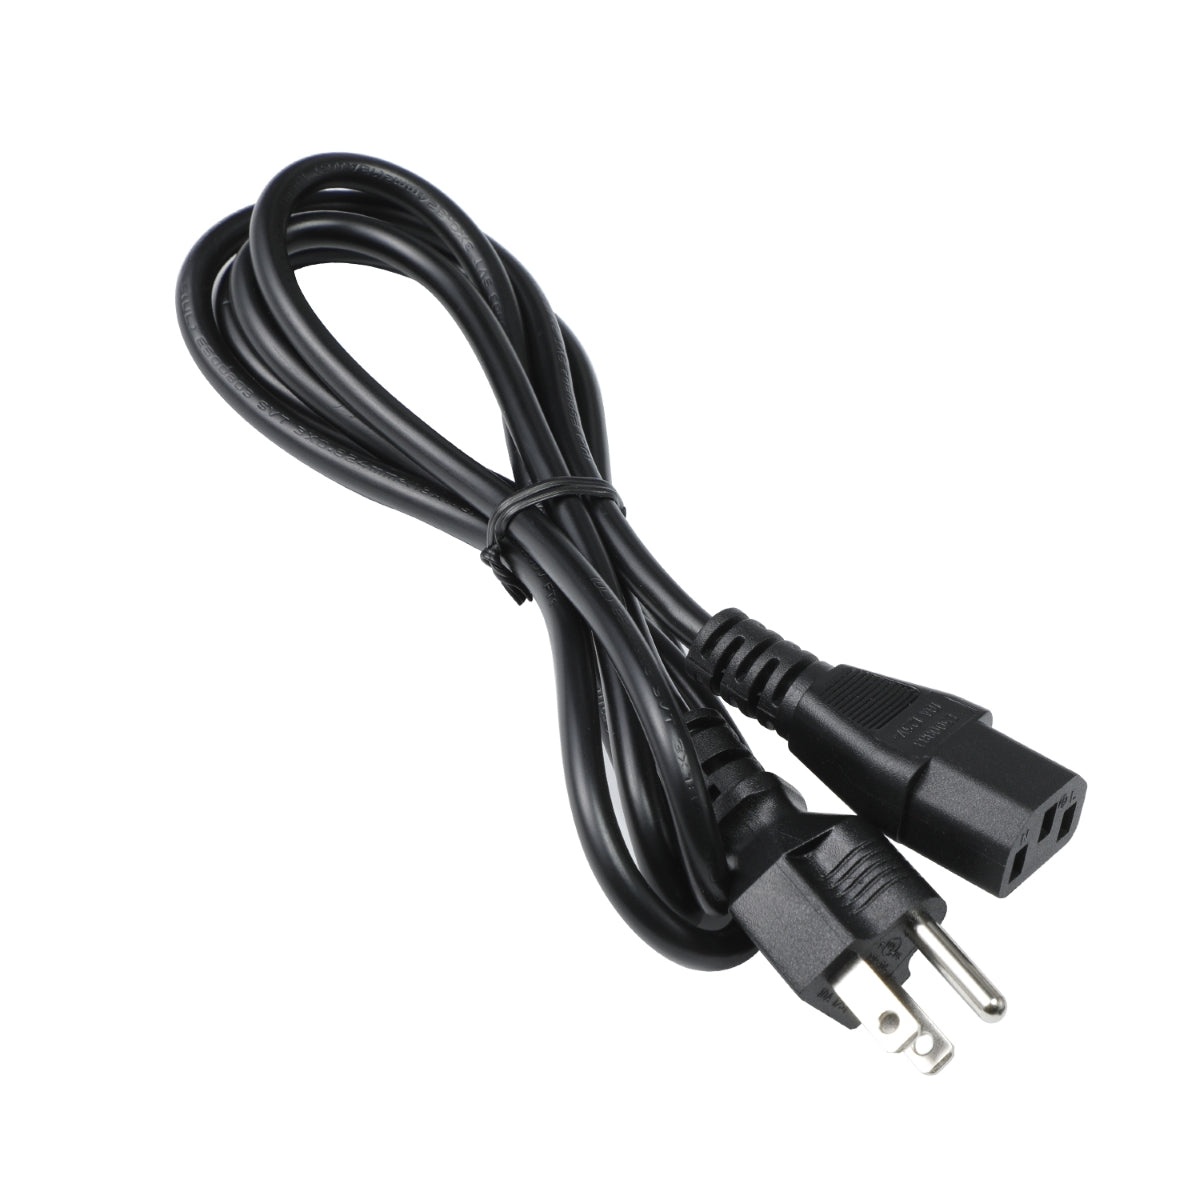 Power Cord for HP Pavilion 550-020 Computer.